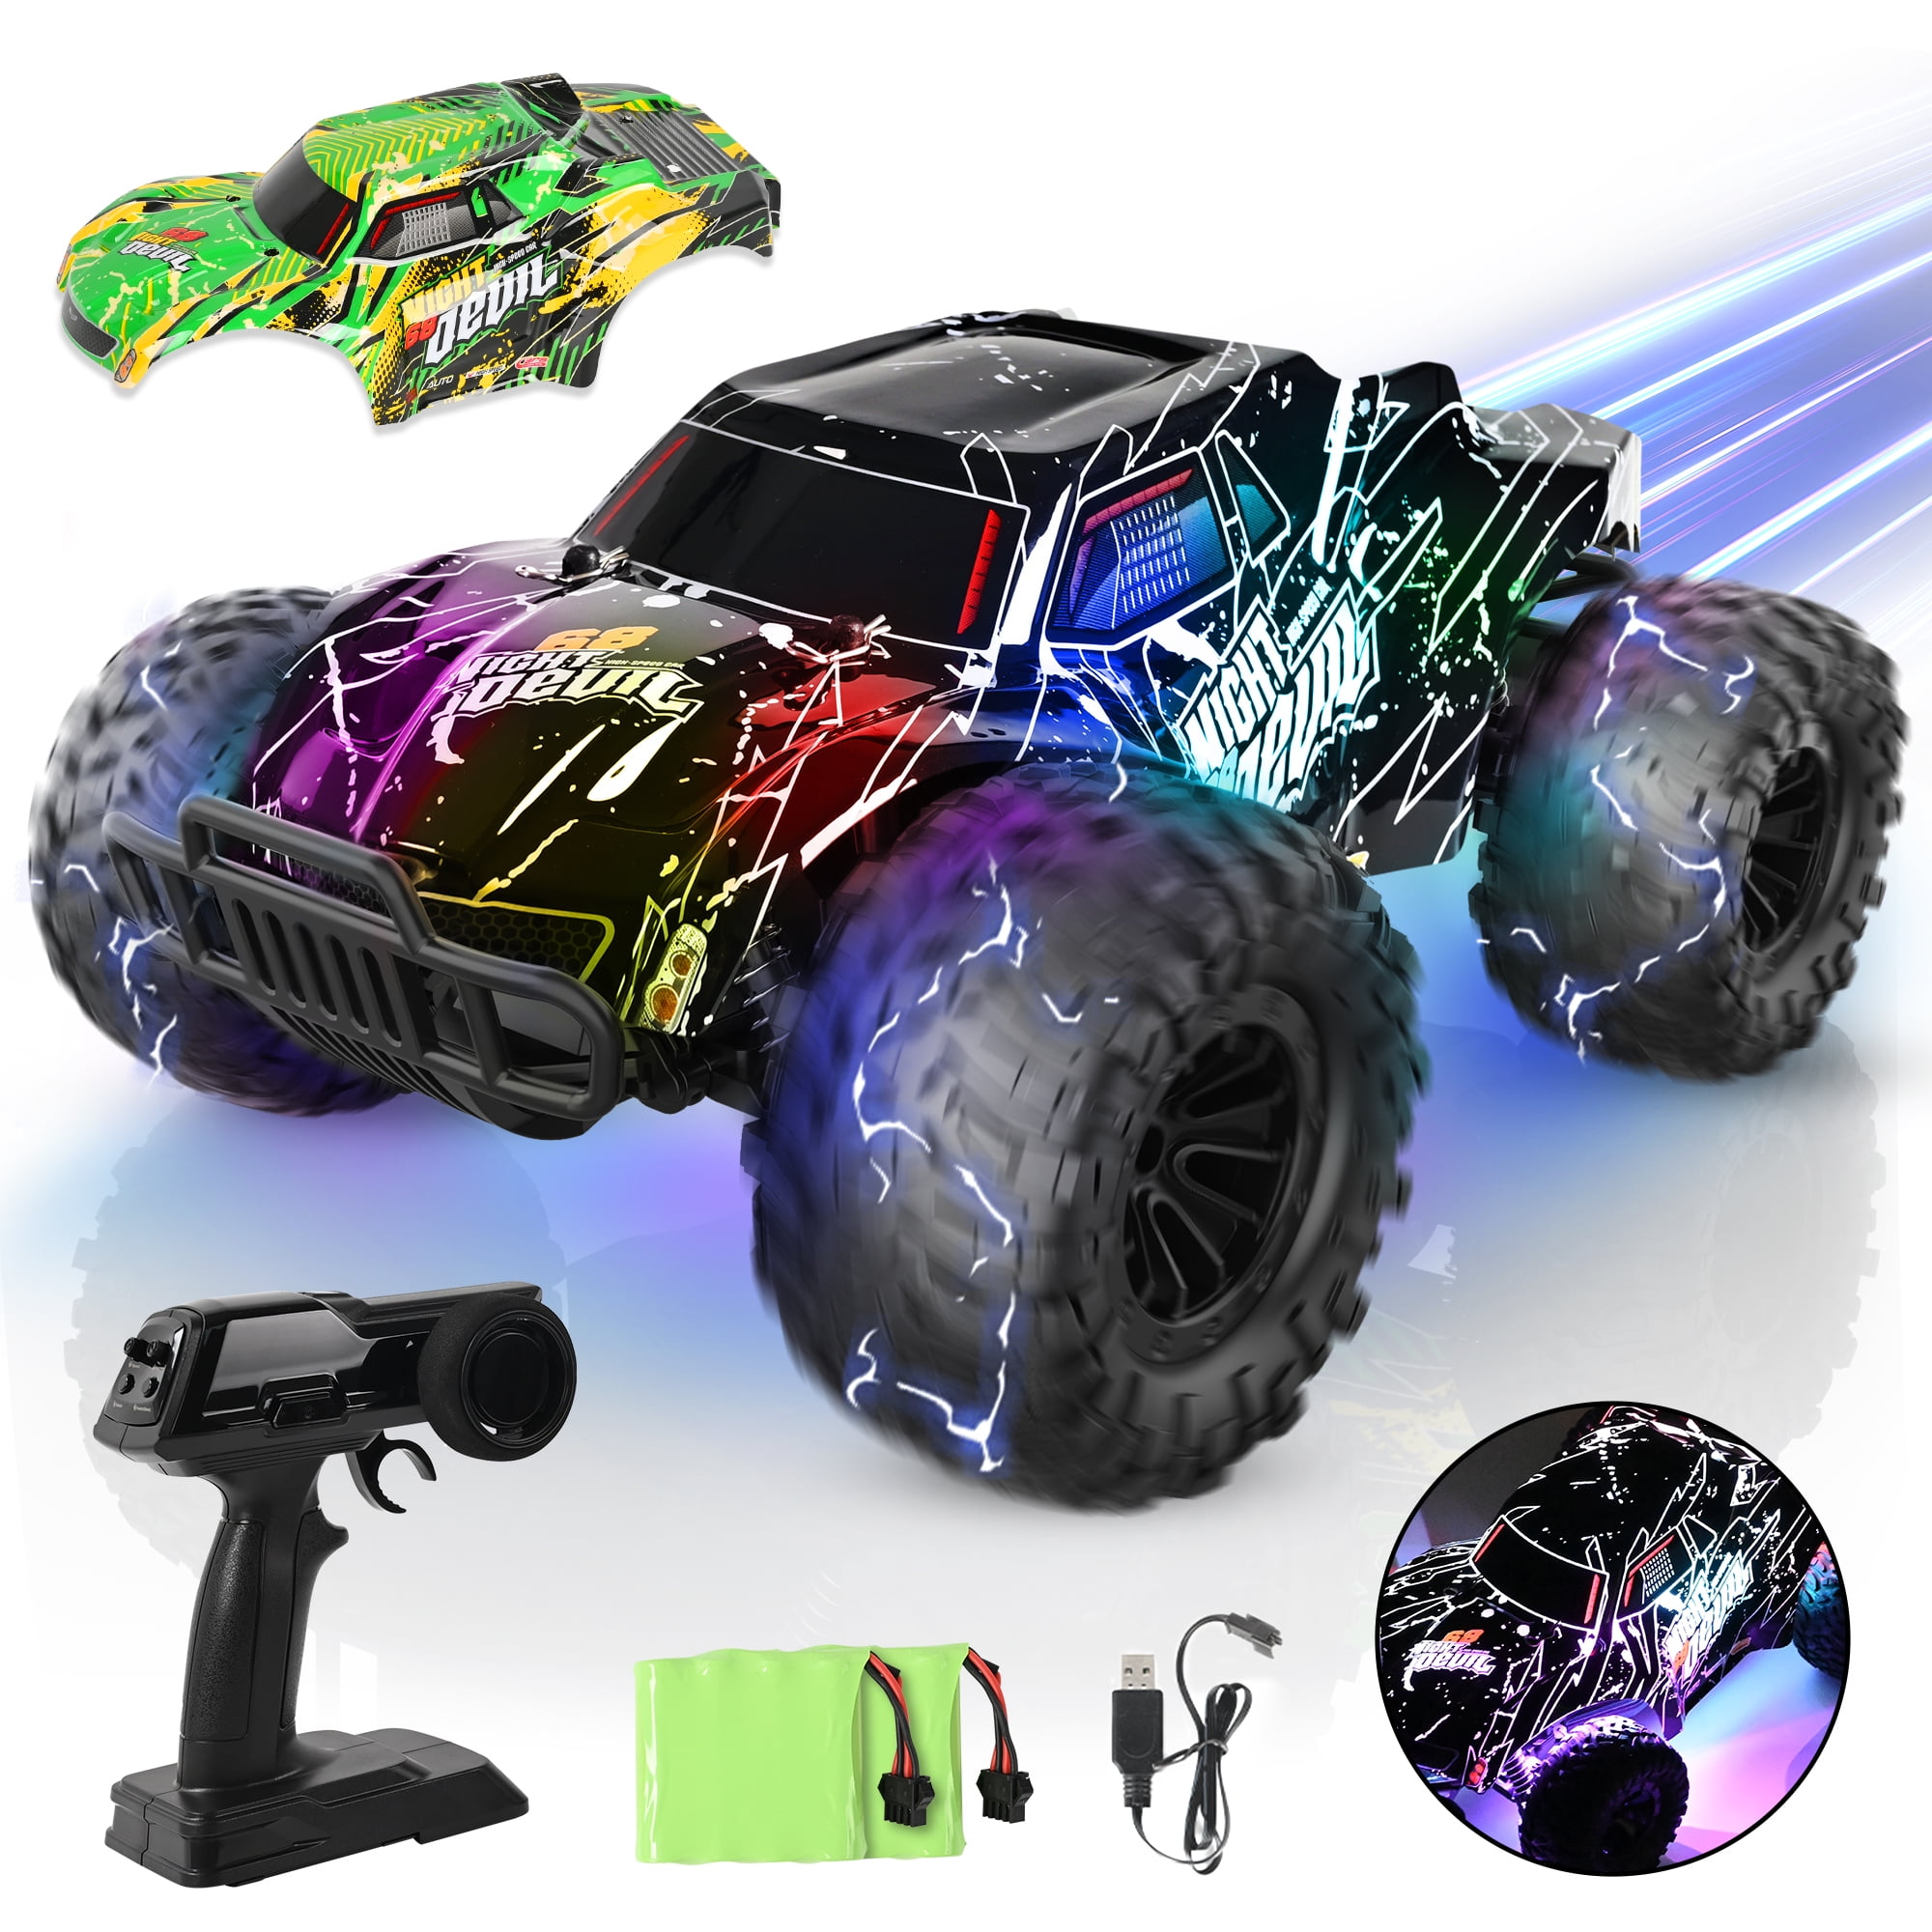 Hot Bee Remote Control Car High Speed RC Cars, 1:10 Scale 46KM/H 4WD Off  Road Monster Trucks,Christmas Gift for Boys Adults